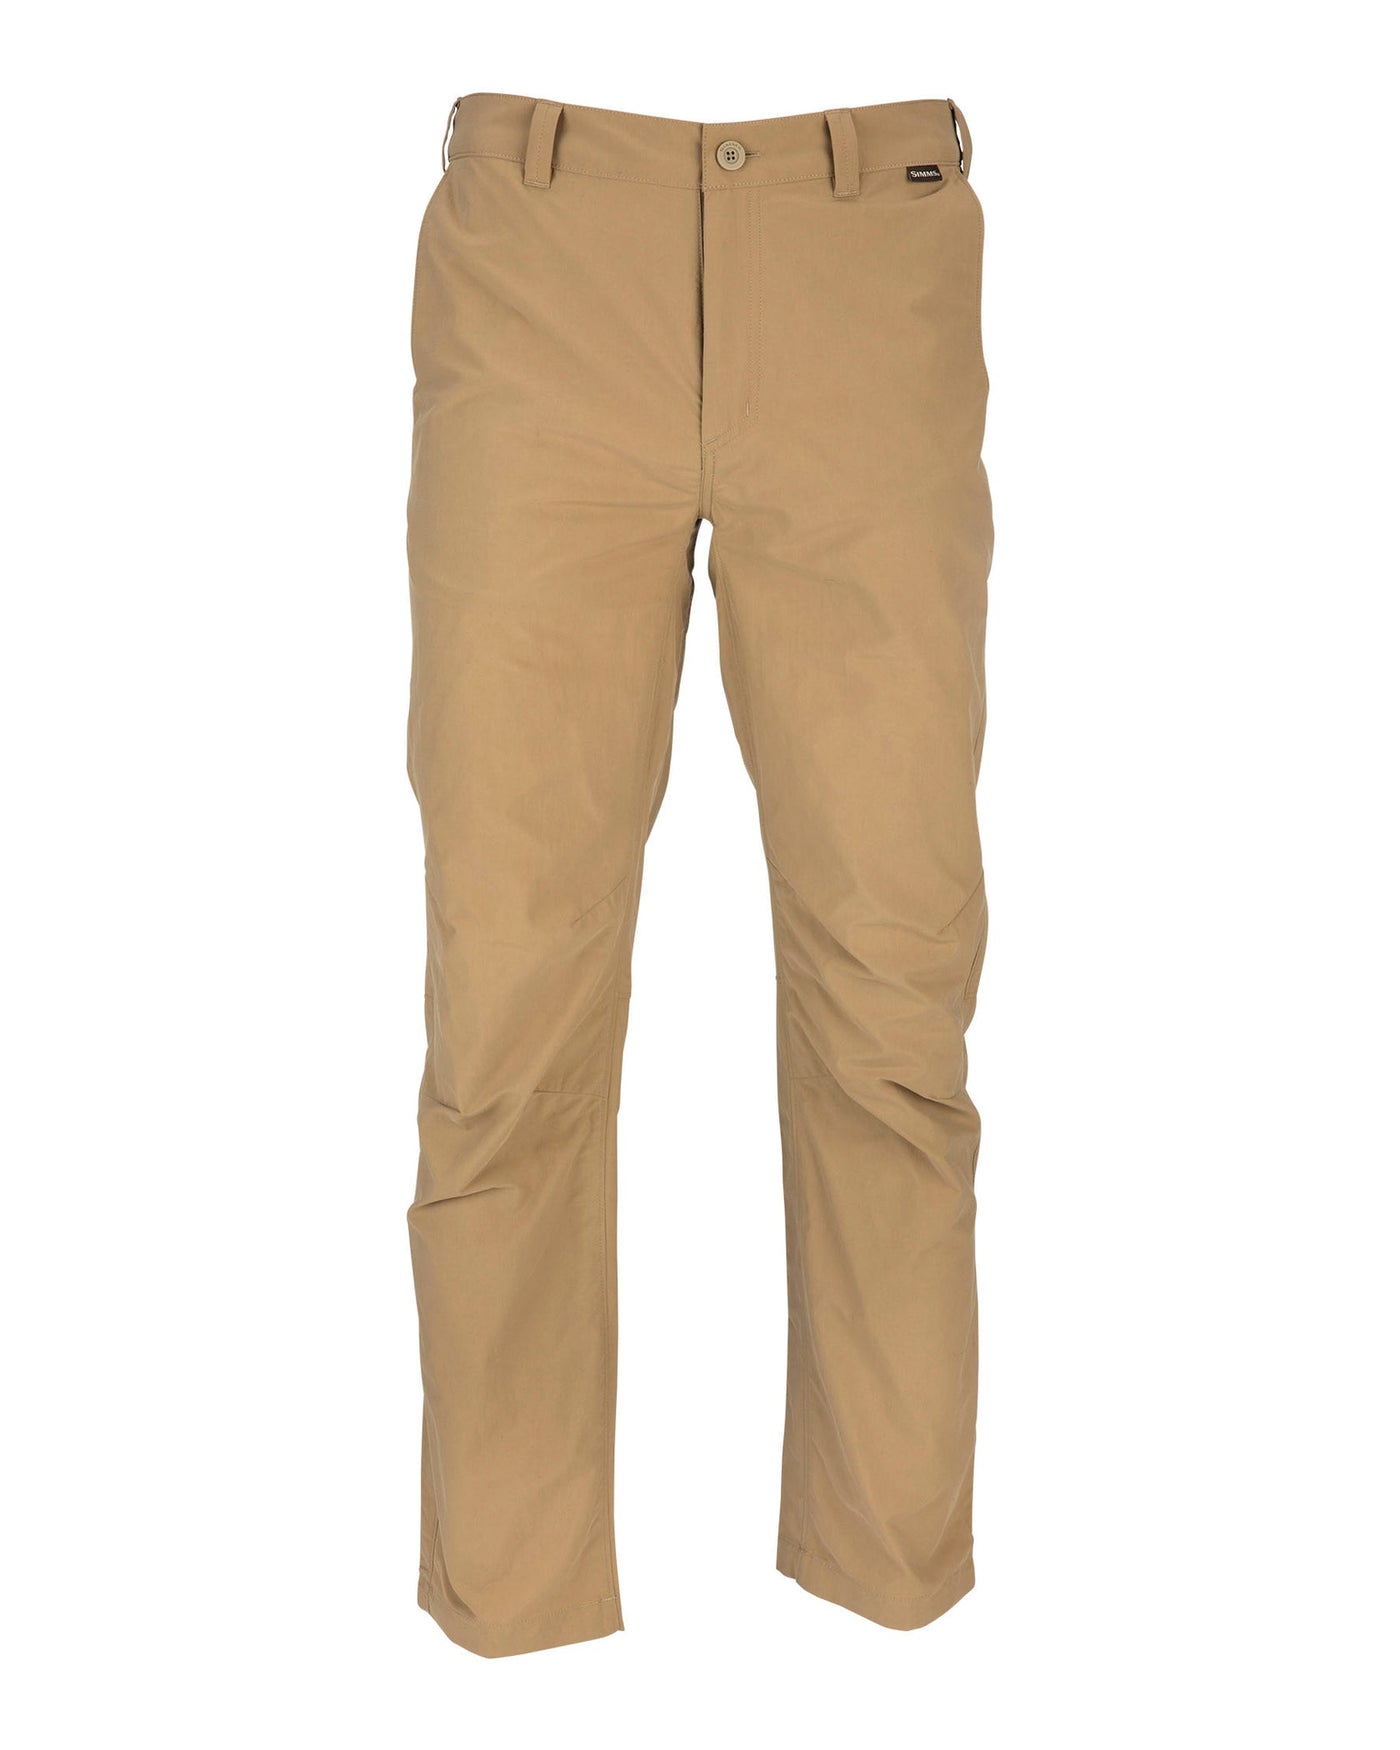 Simms Men's Superlight Pant (Discontinued)